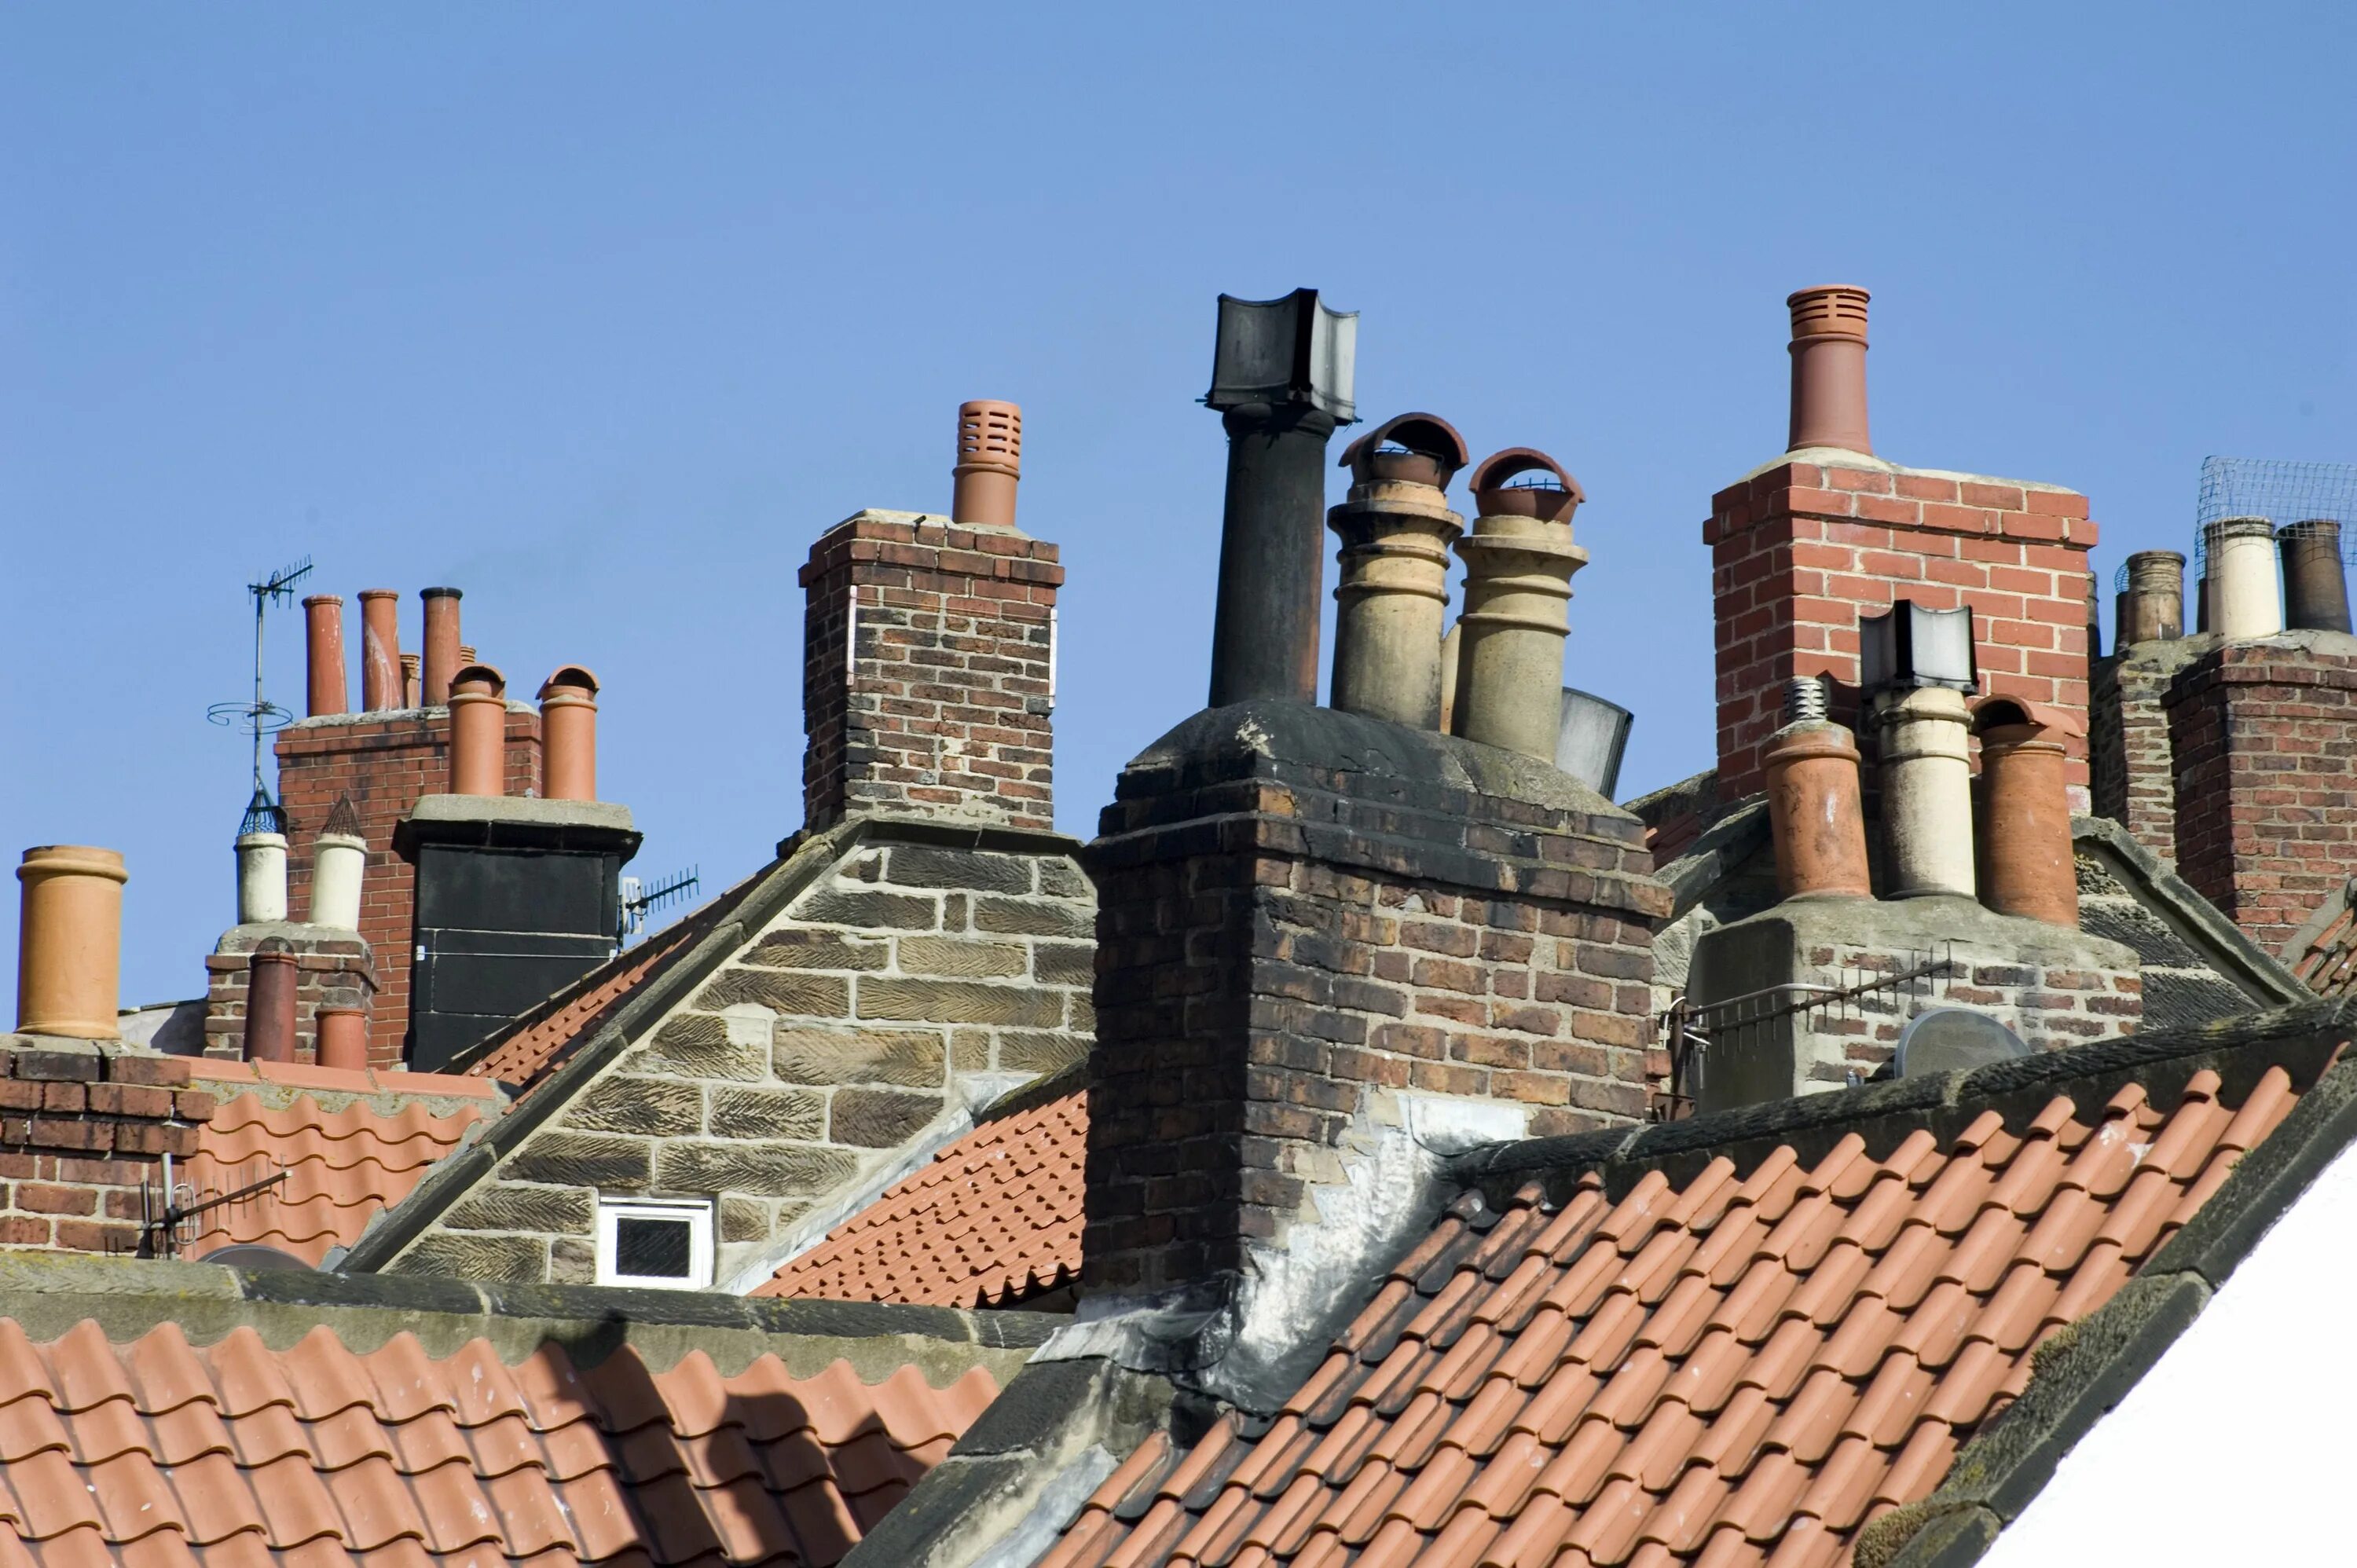 Chimney Sweep. Chimney on the Roof. Chimney Stack. Old building with Chimney. Chimneys перевод